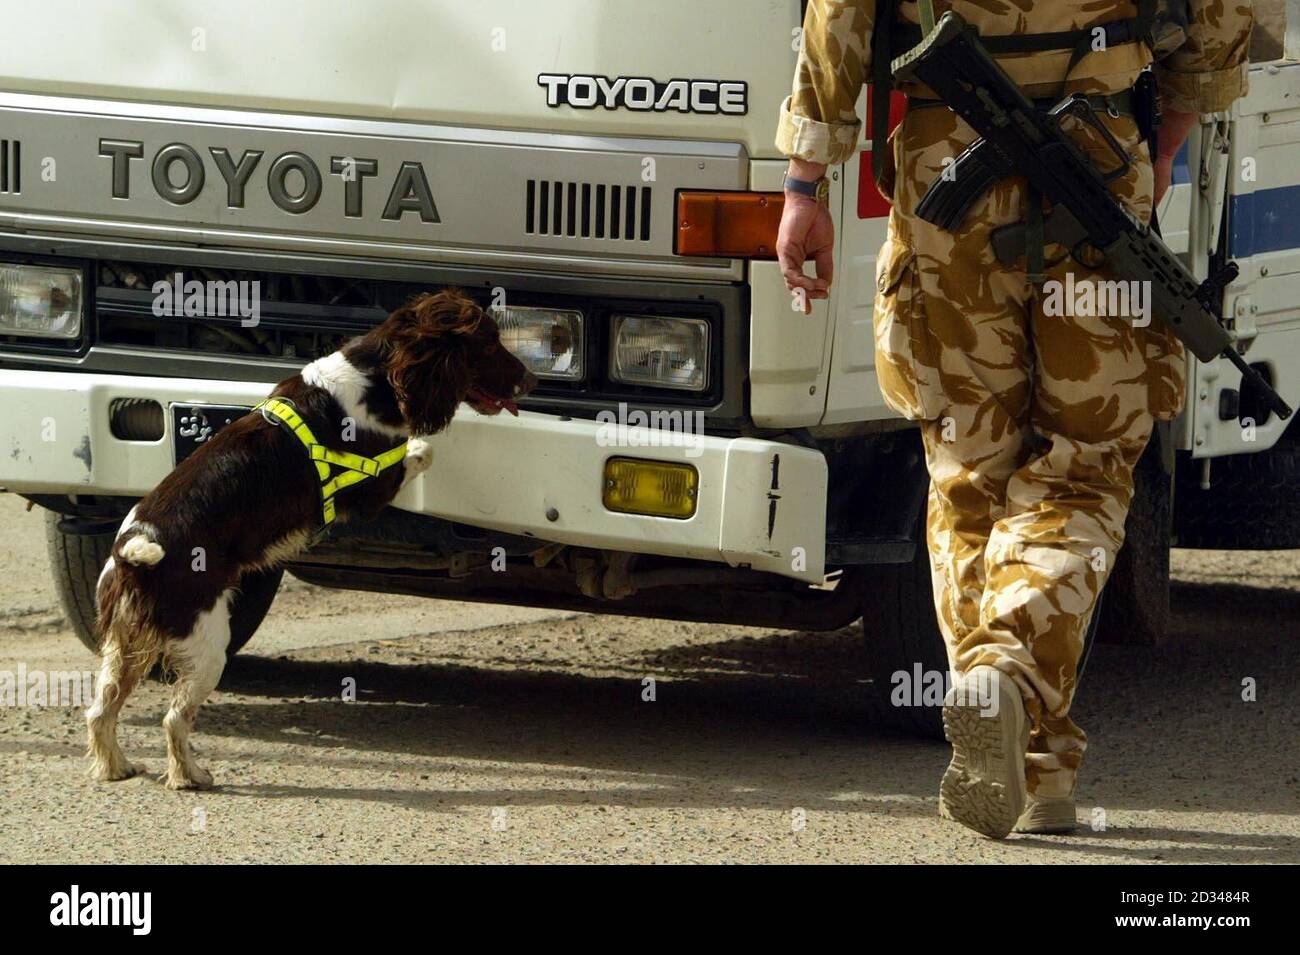 Poppy, an arms explosive search dog joins the Royal Engineer High Risk Search team search cars in Basra after three Iraqi soldiers were killed in a motorcycle bomb attack in the city earlier. The booby-trapped vehicle exploded close to the Old State Buildings, in the Al-Hussein district, shortly before 8am local time, as troops carried out patrols. British quick-response teams have been sent to the scene and bomb disposal experts are arriving to examine the device. Stock Photo